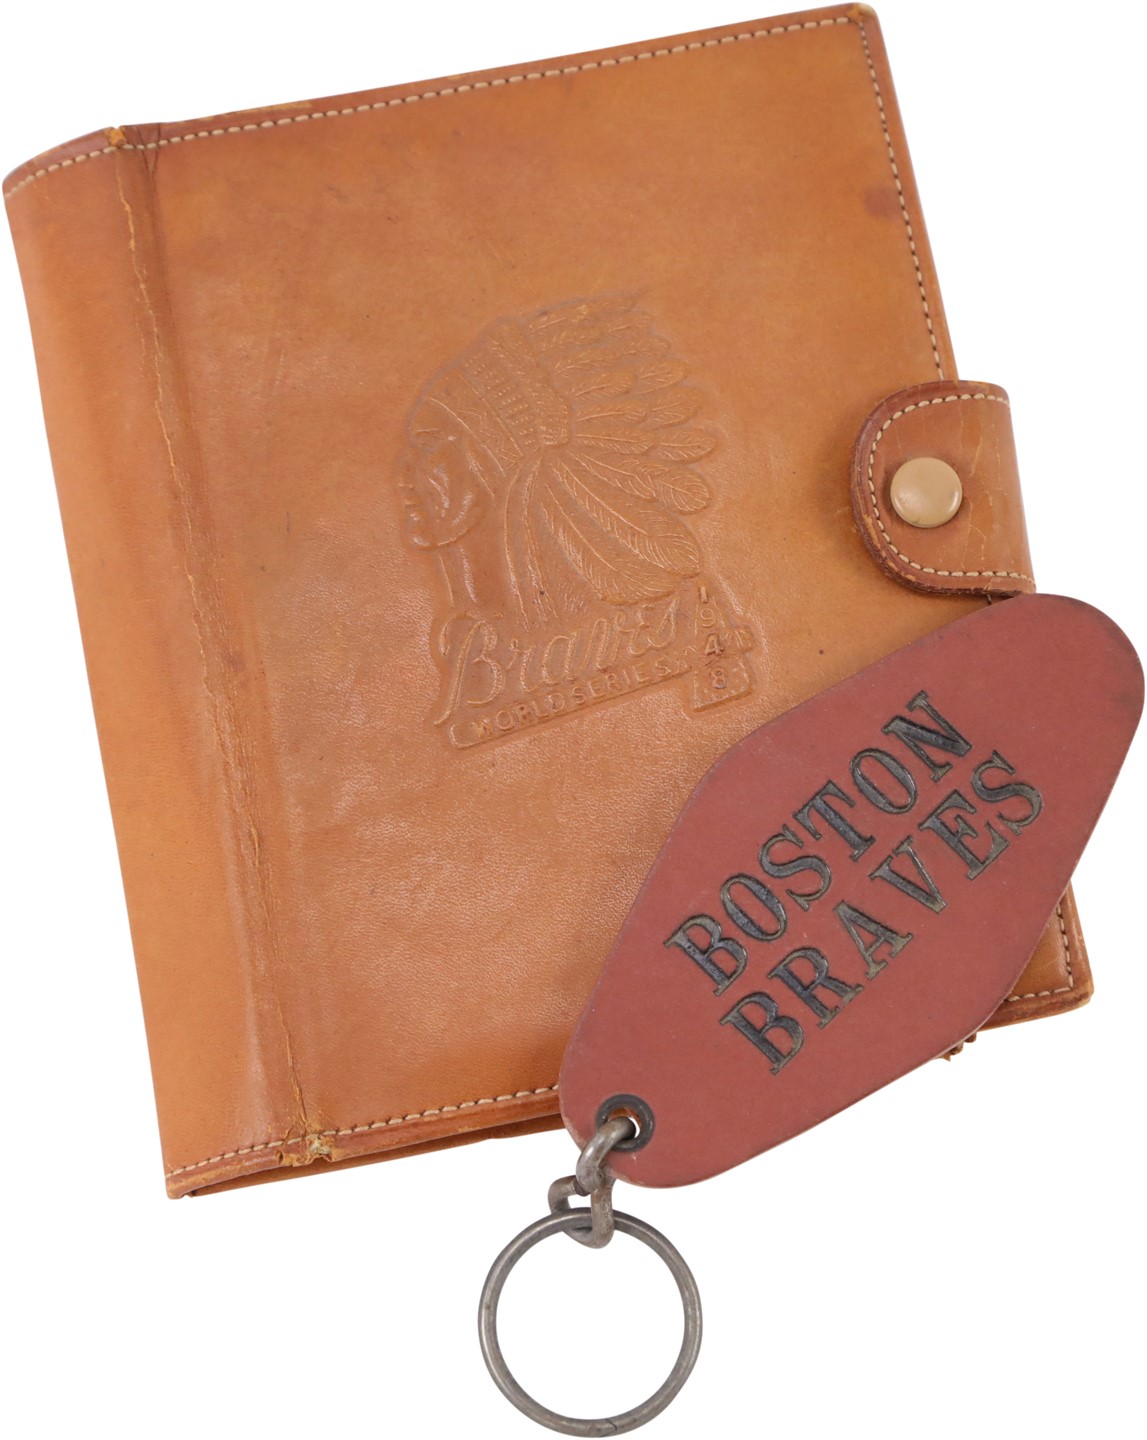 - 1948 Boston Braves Leather Wallet and Locker Roon Key Chain